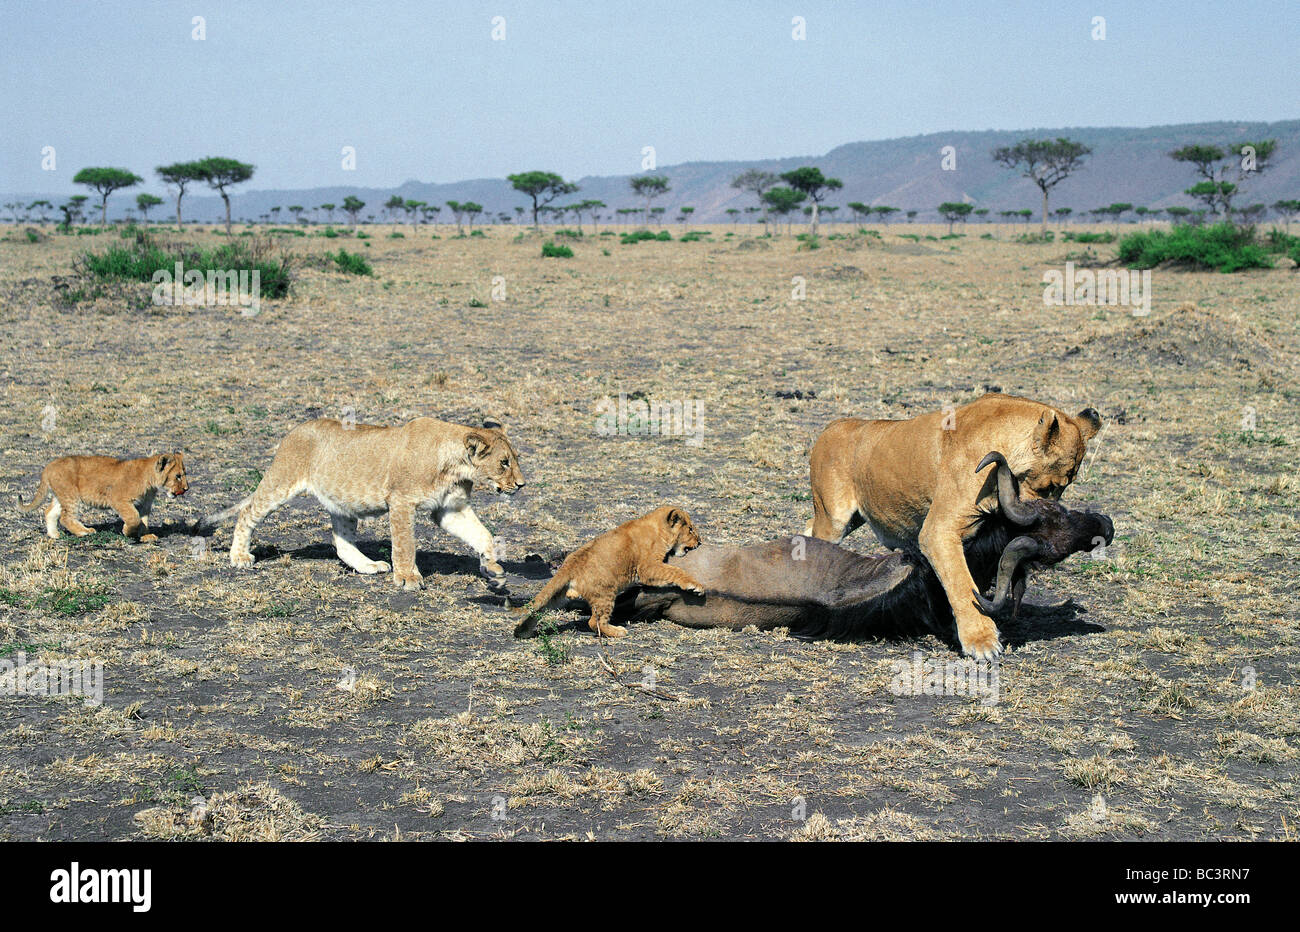 Lioness dragging freshly killed wildebeest with cubs following Masai Mara National Reserve Kenya East Africa Stock Photo